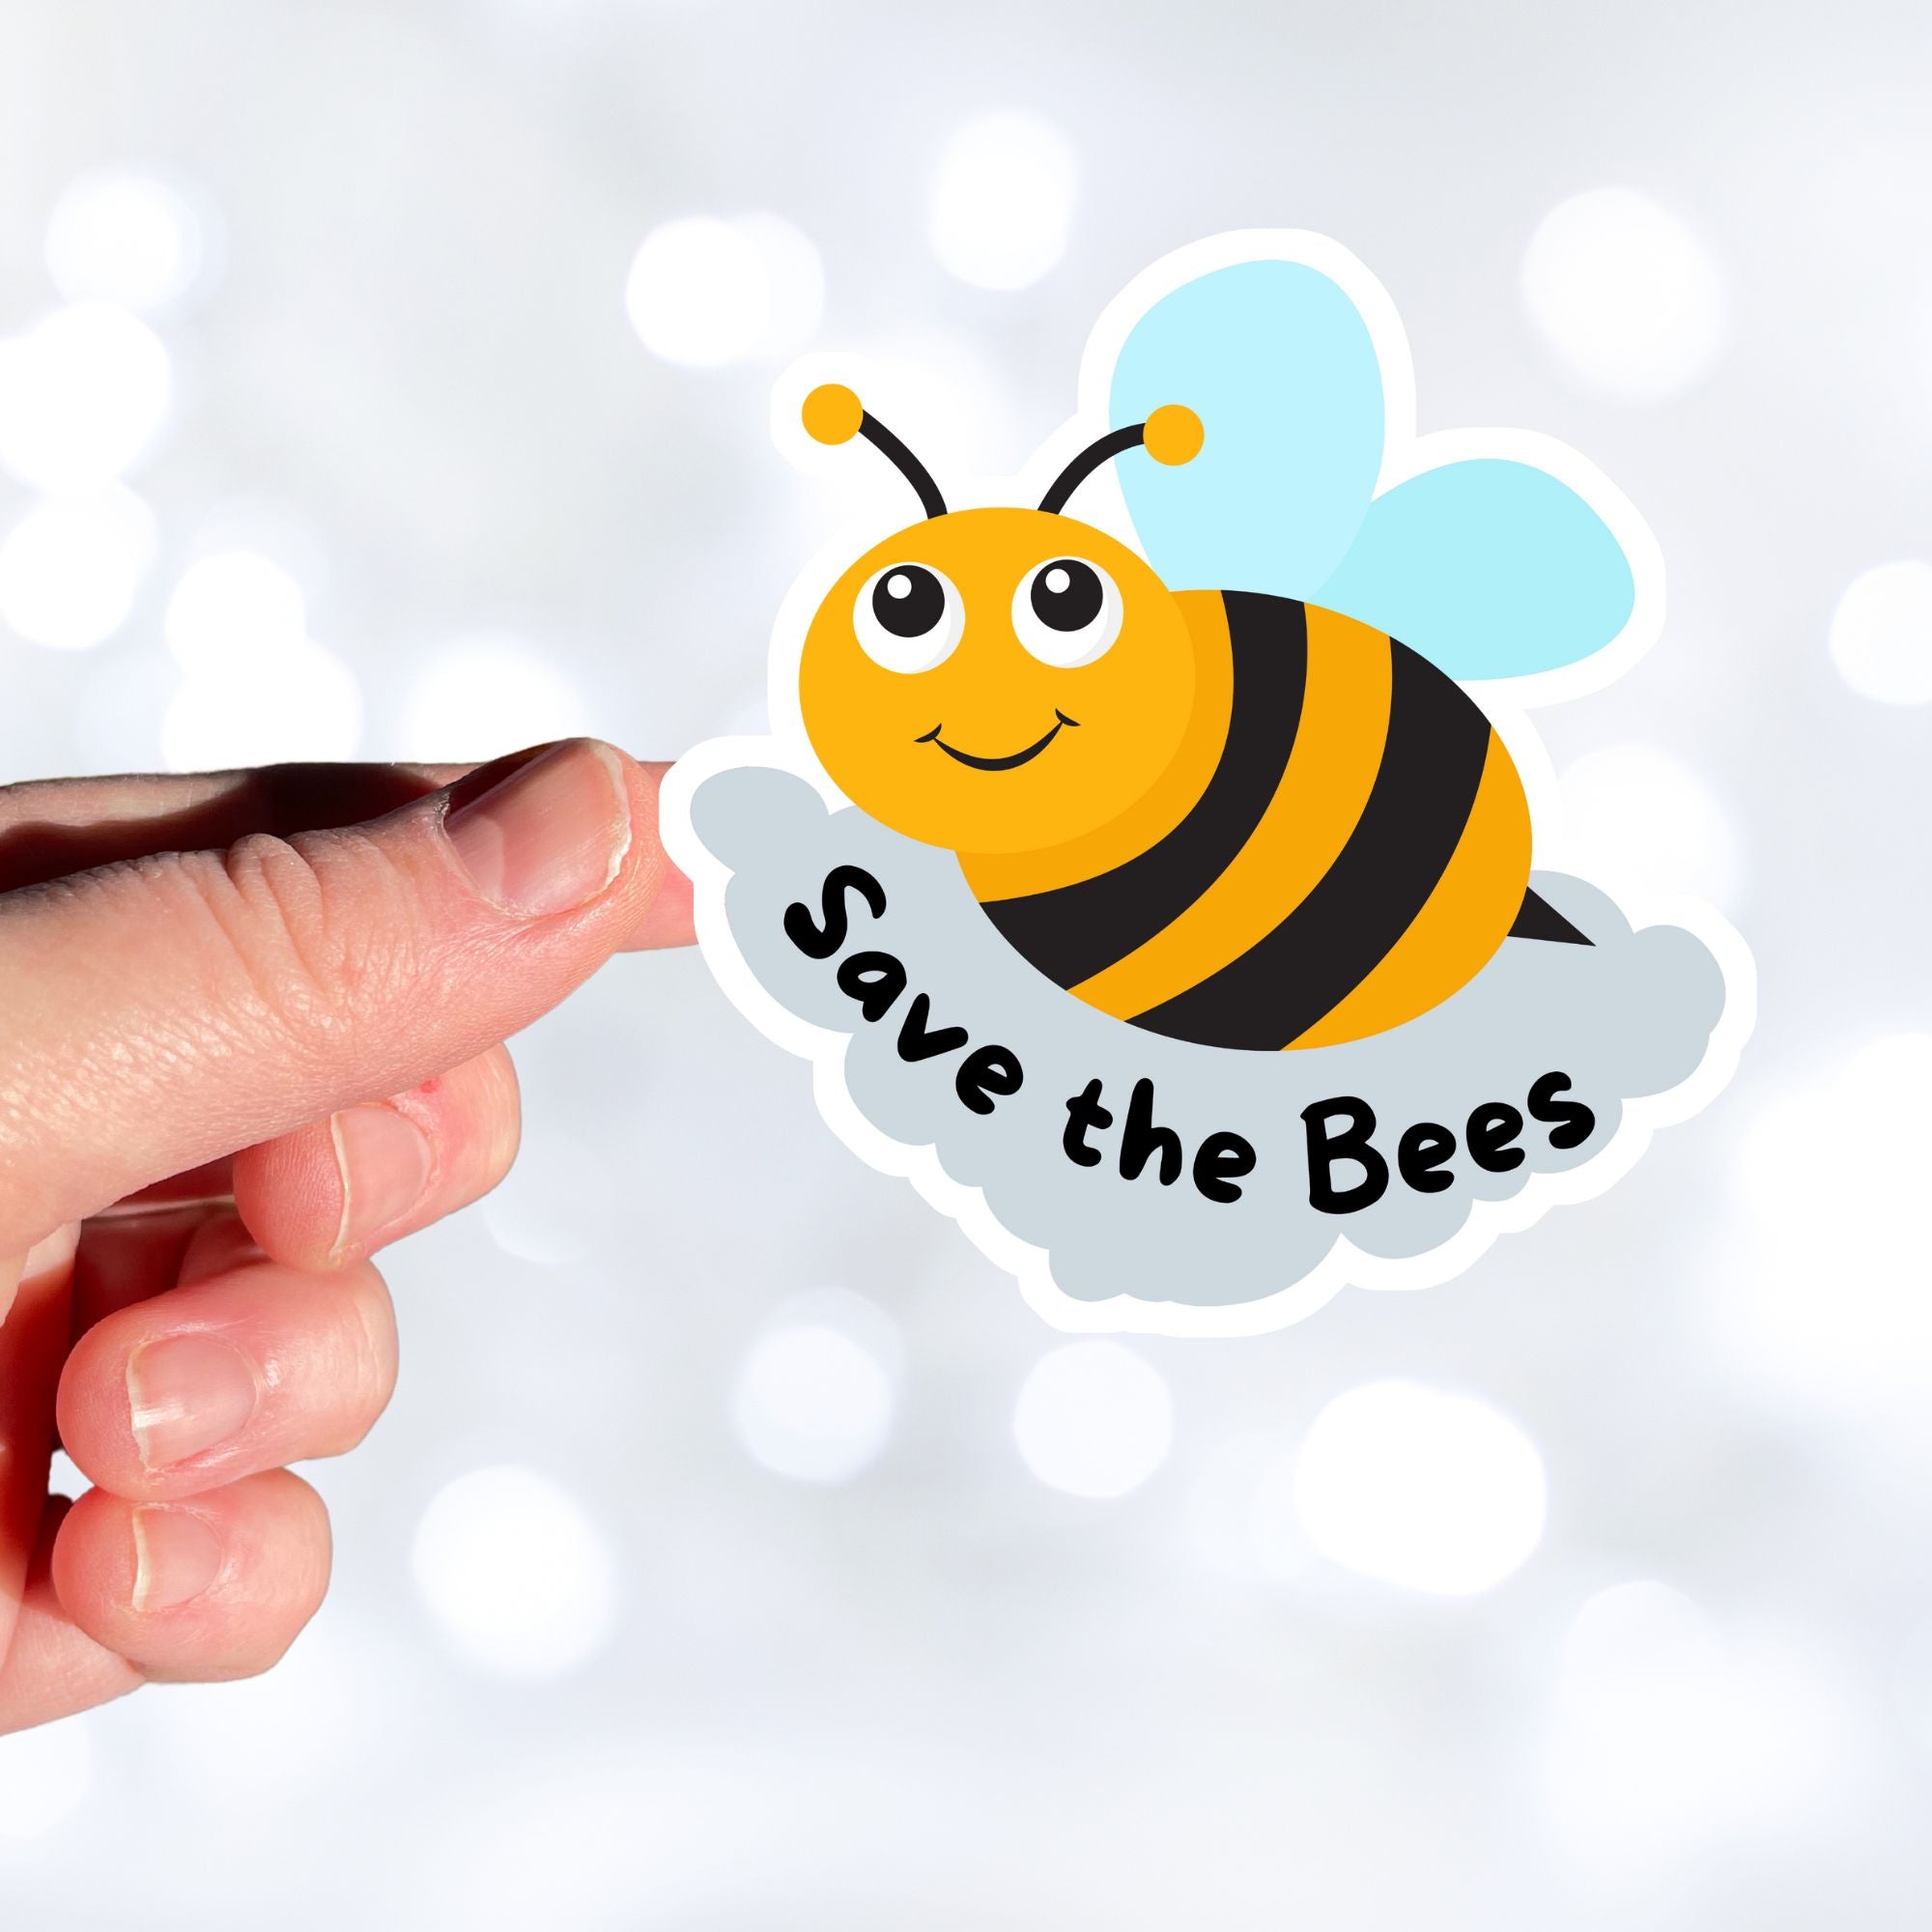 This cute individual die-cut sticker is great for anyone who appreciates our environment or just wants to smell the flowers. The Save the Bees sticker has a happy bumblebee with the saying Save the Bees below. Pair it with our Flowers, Ladybugs and Bees, or Buggin Around sticker sheets for a great gift. This image shows a hand holding the Save the Bees sticker.